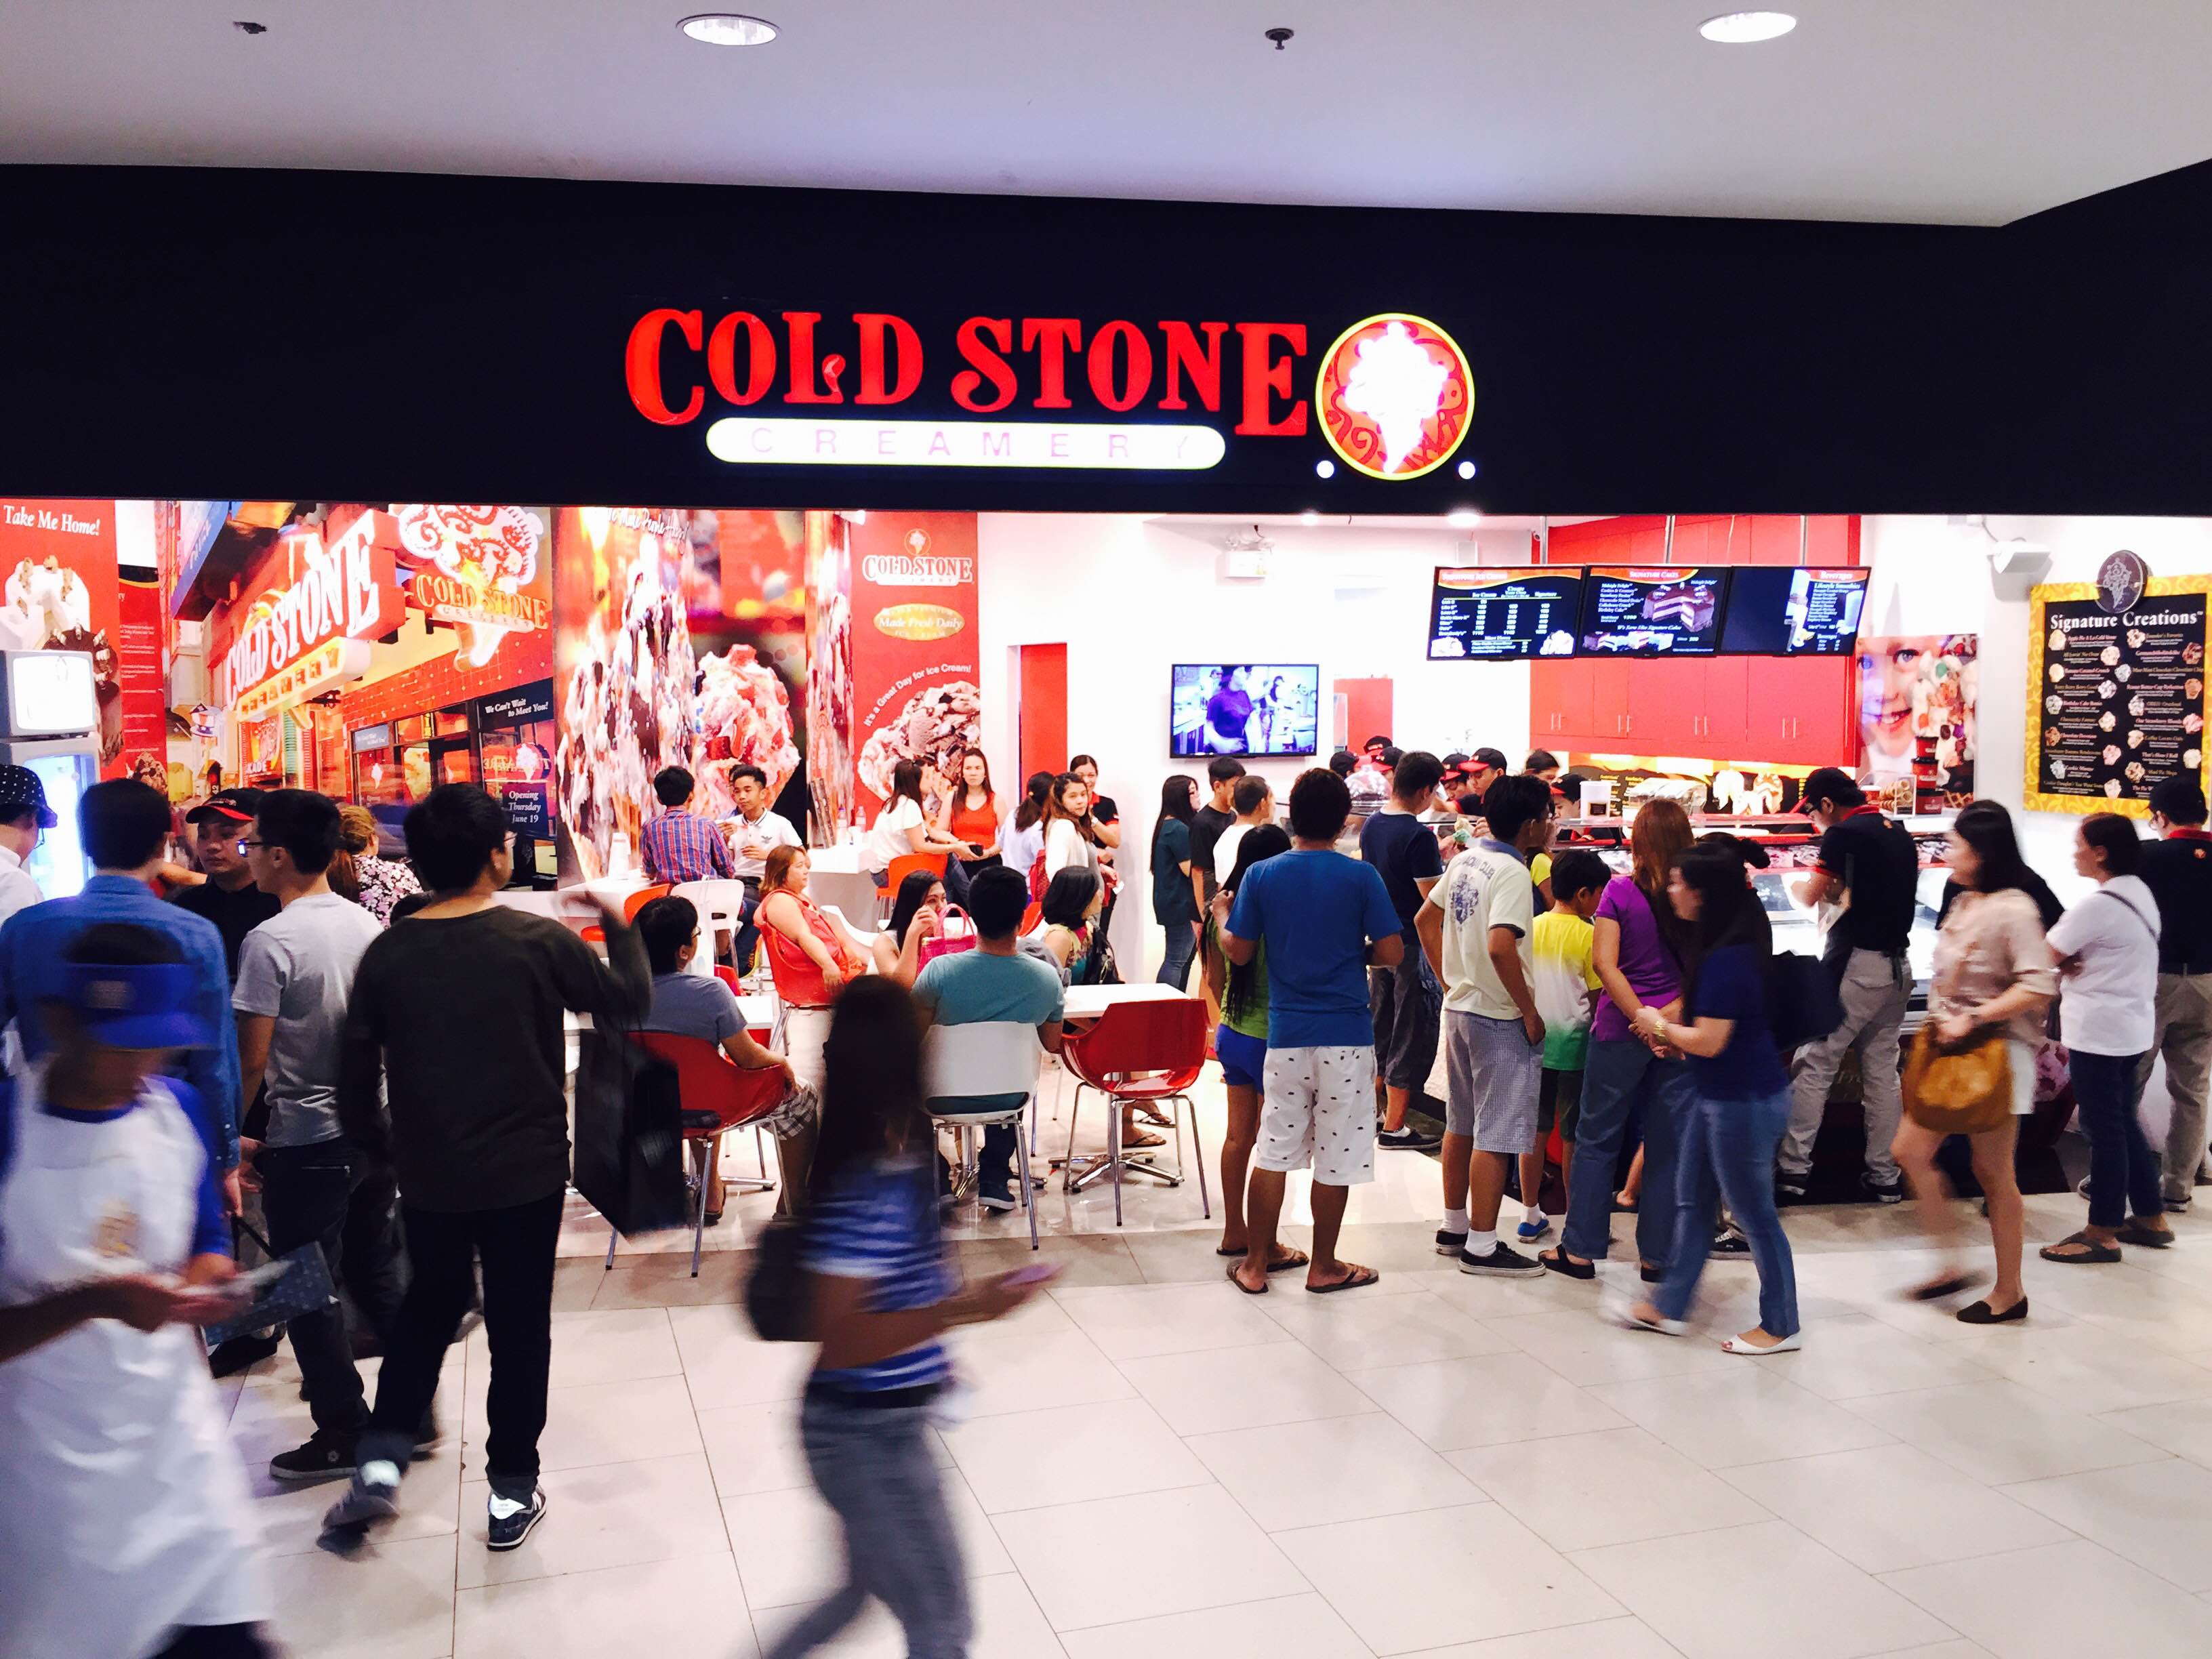 Exterior of Cold Stone Creamery in the Philippines.